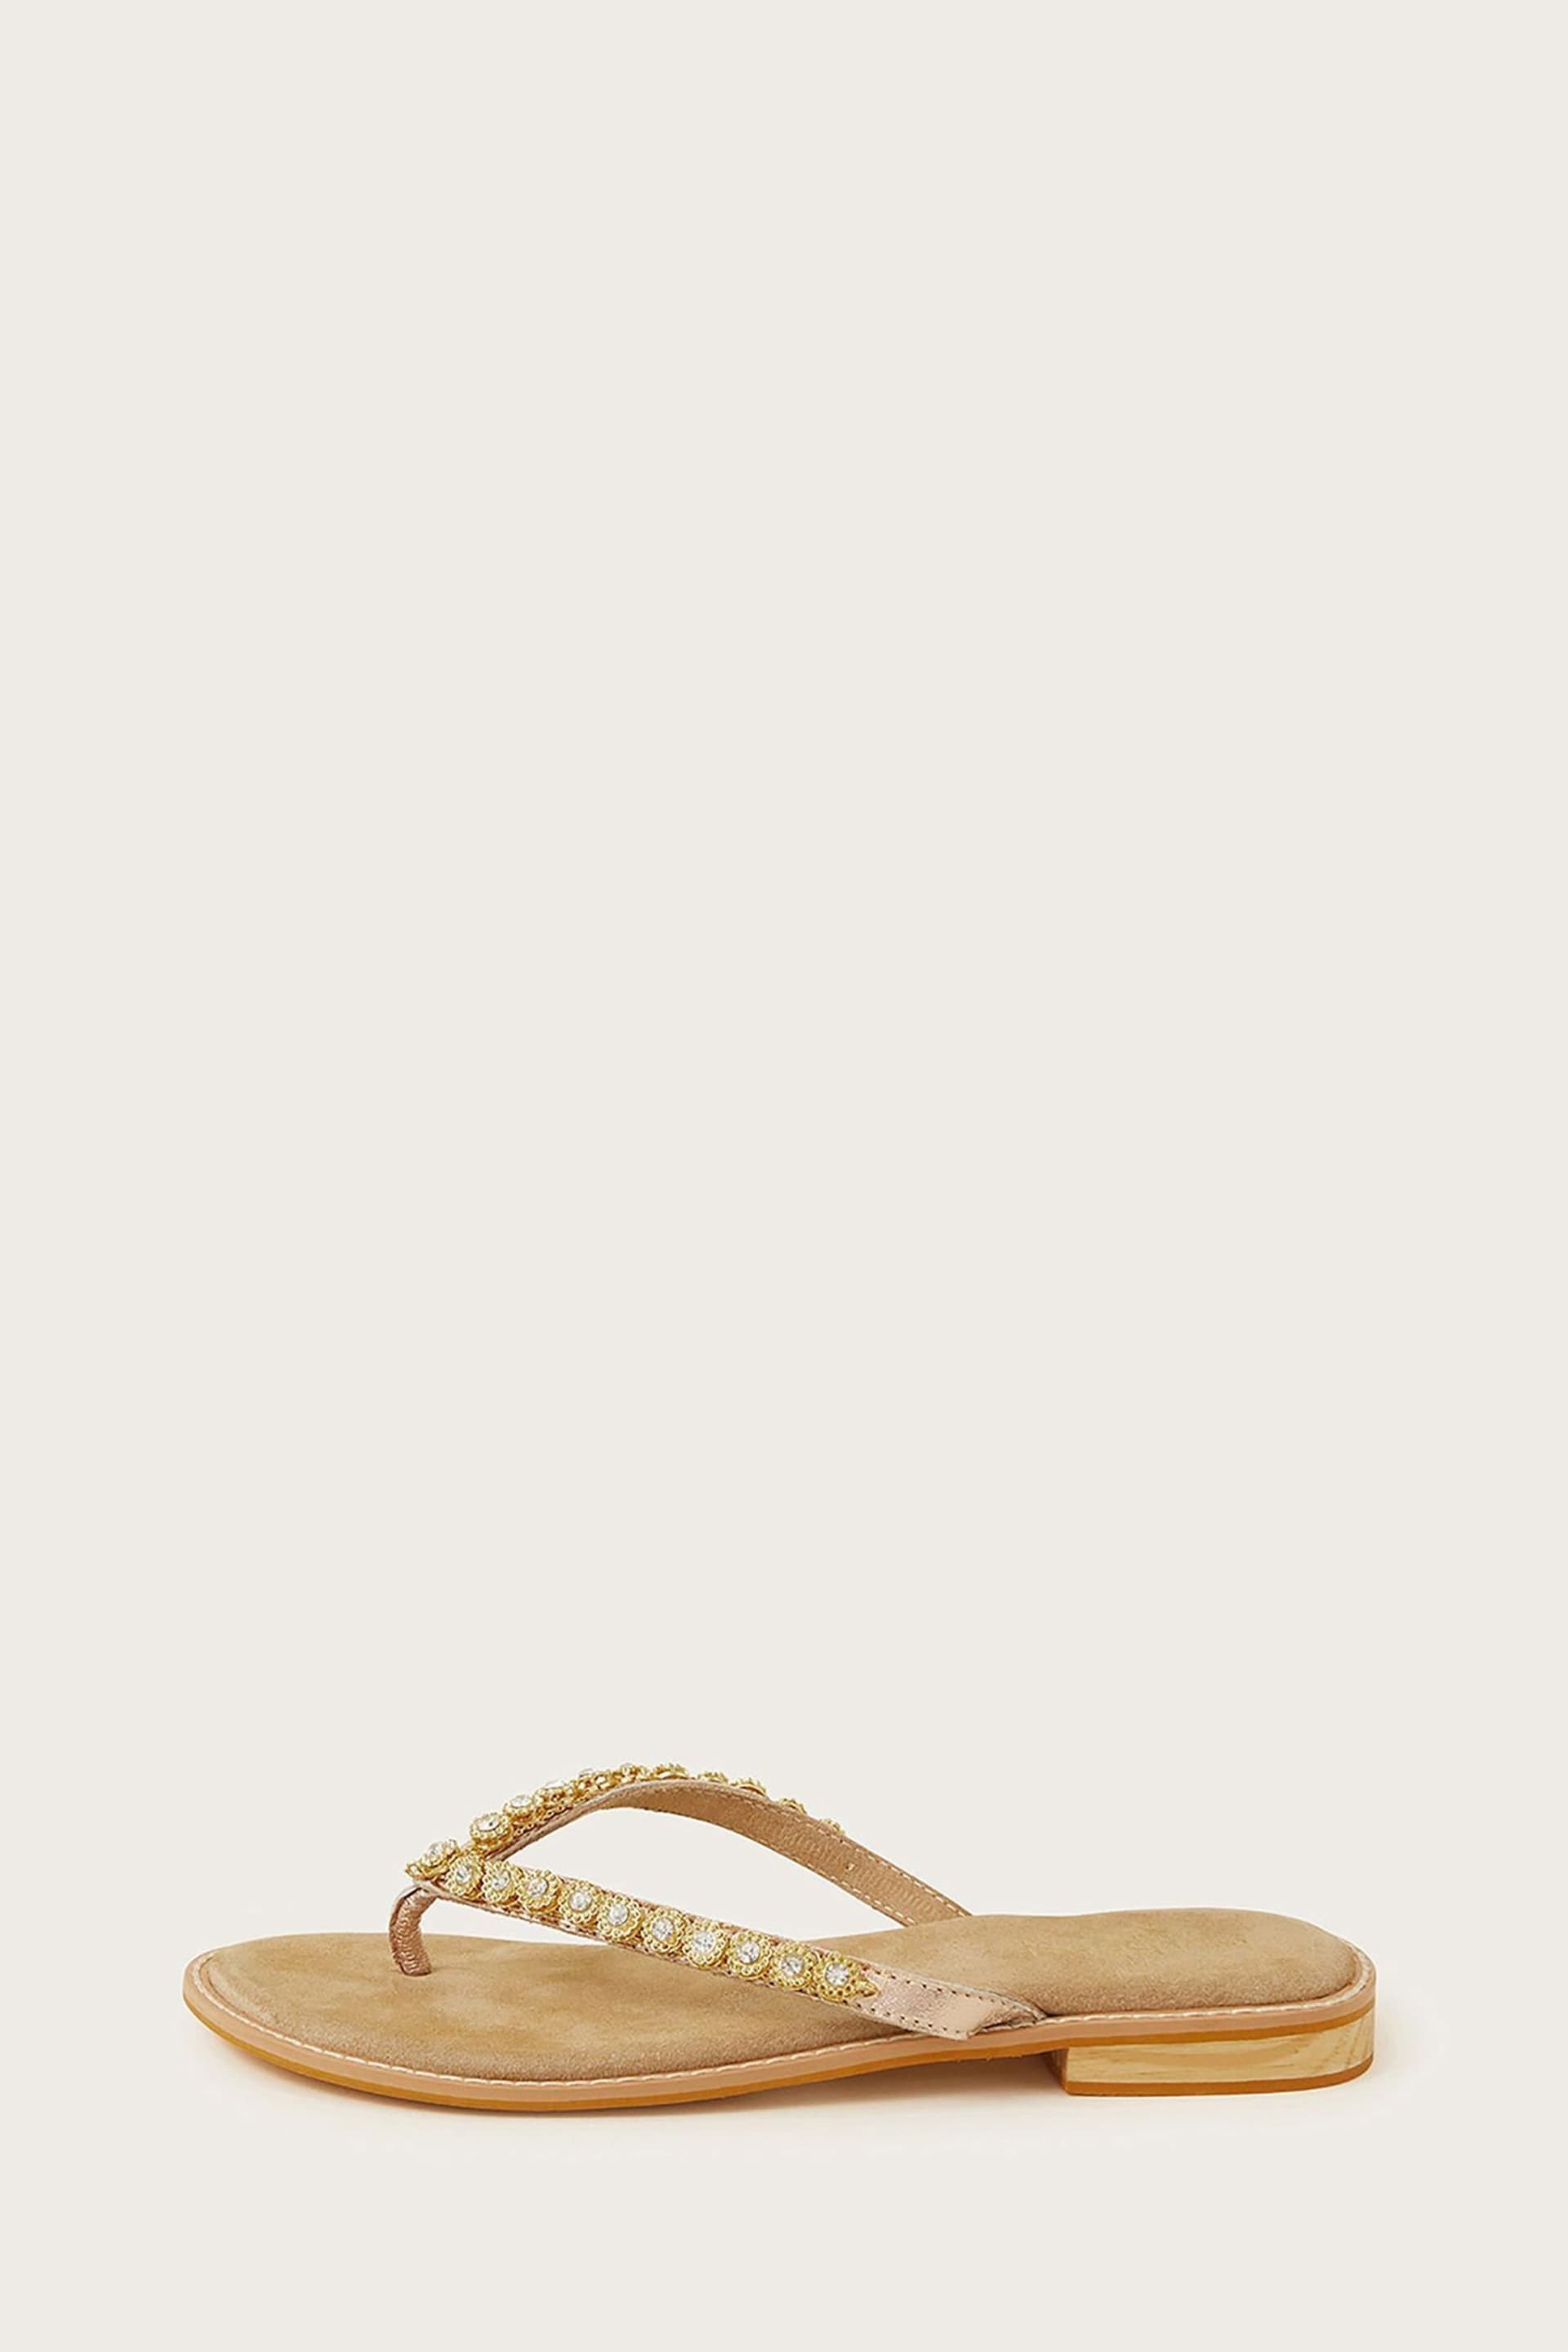 Monsoon Gold Easy Toe Post Sandals - Image 2 of 3